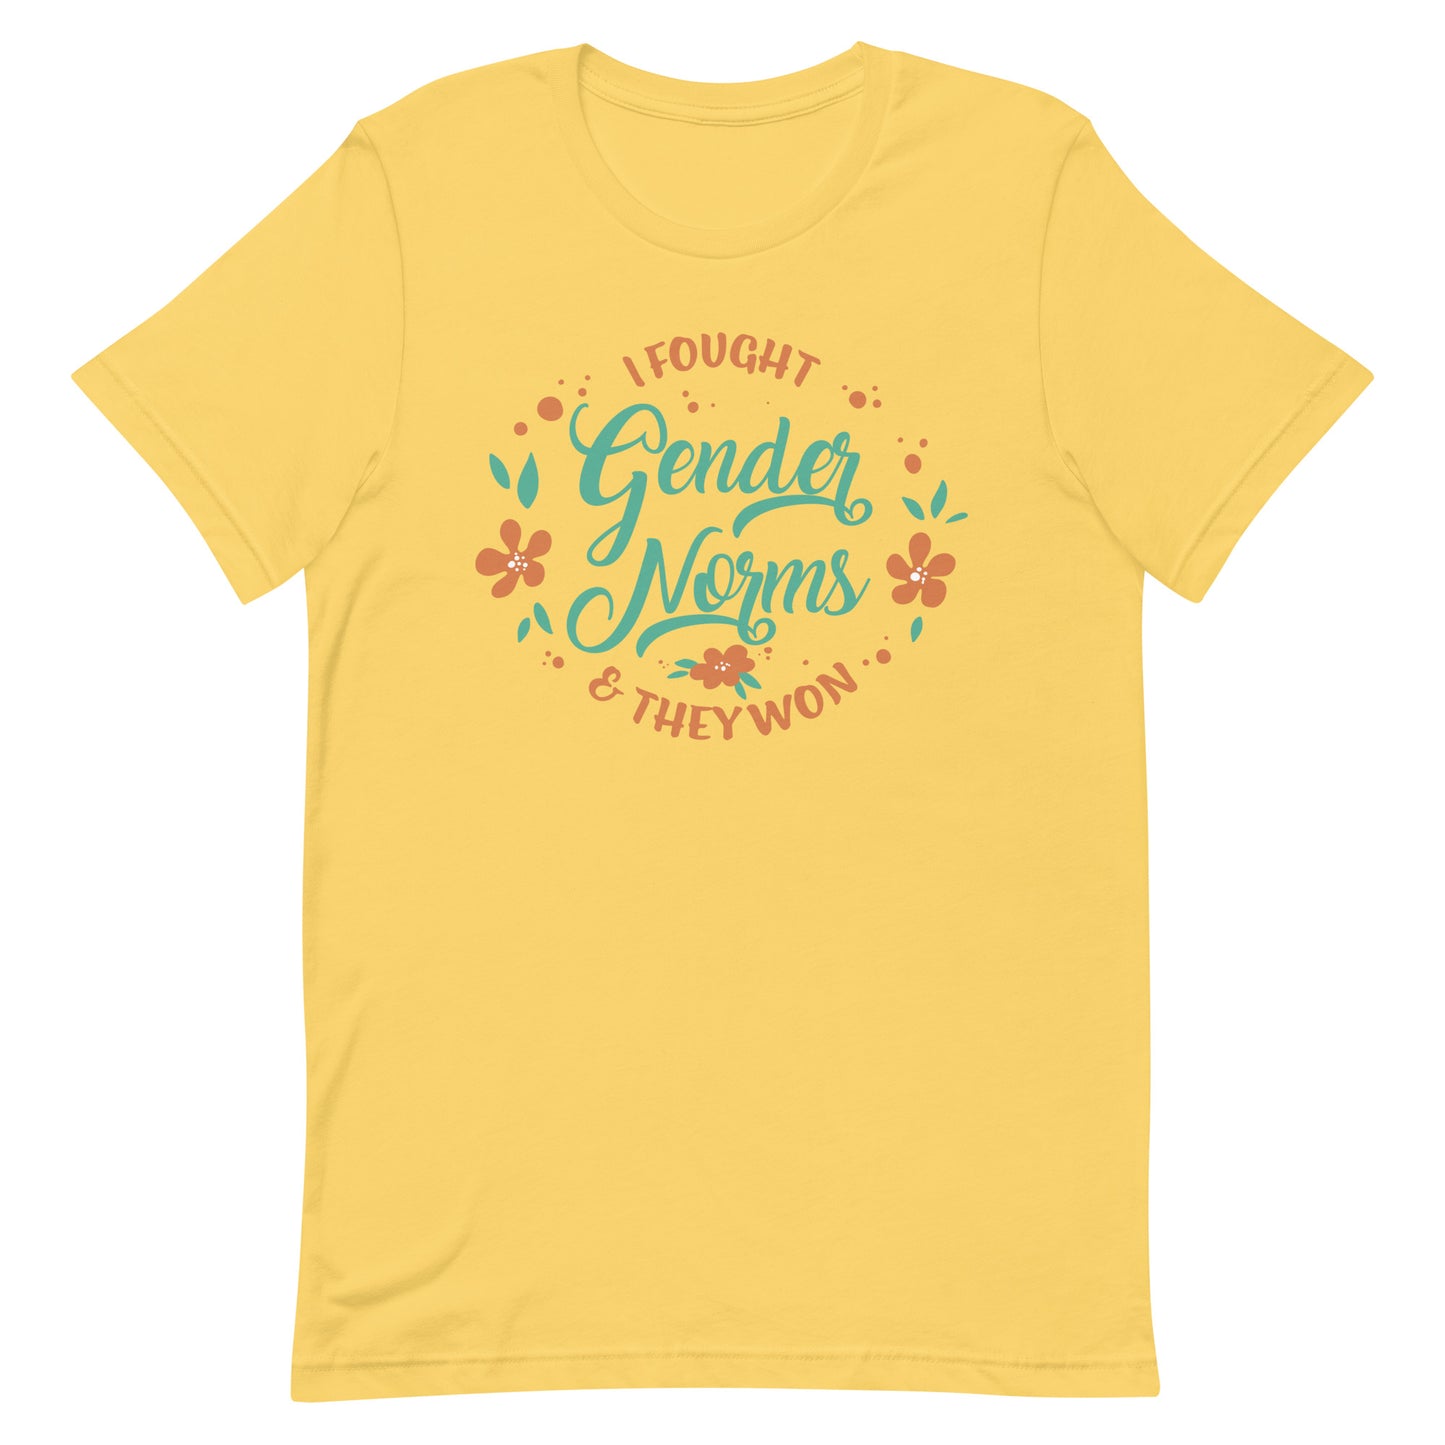 I Fought Gender Norms and They Won Unisex t-shirt